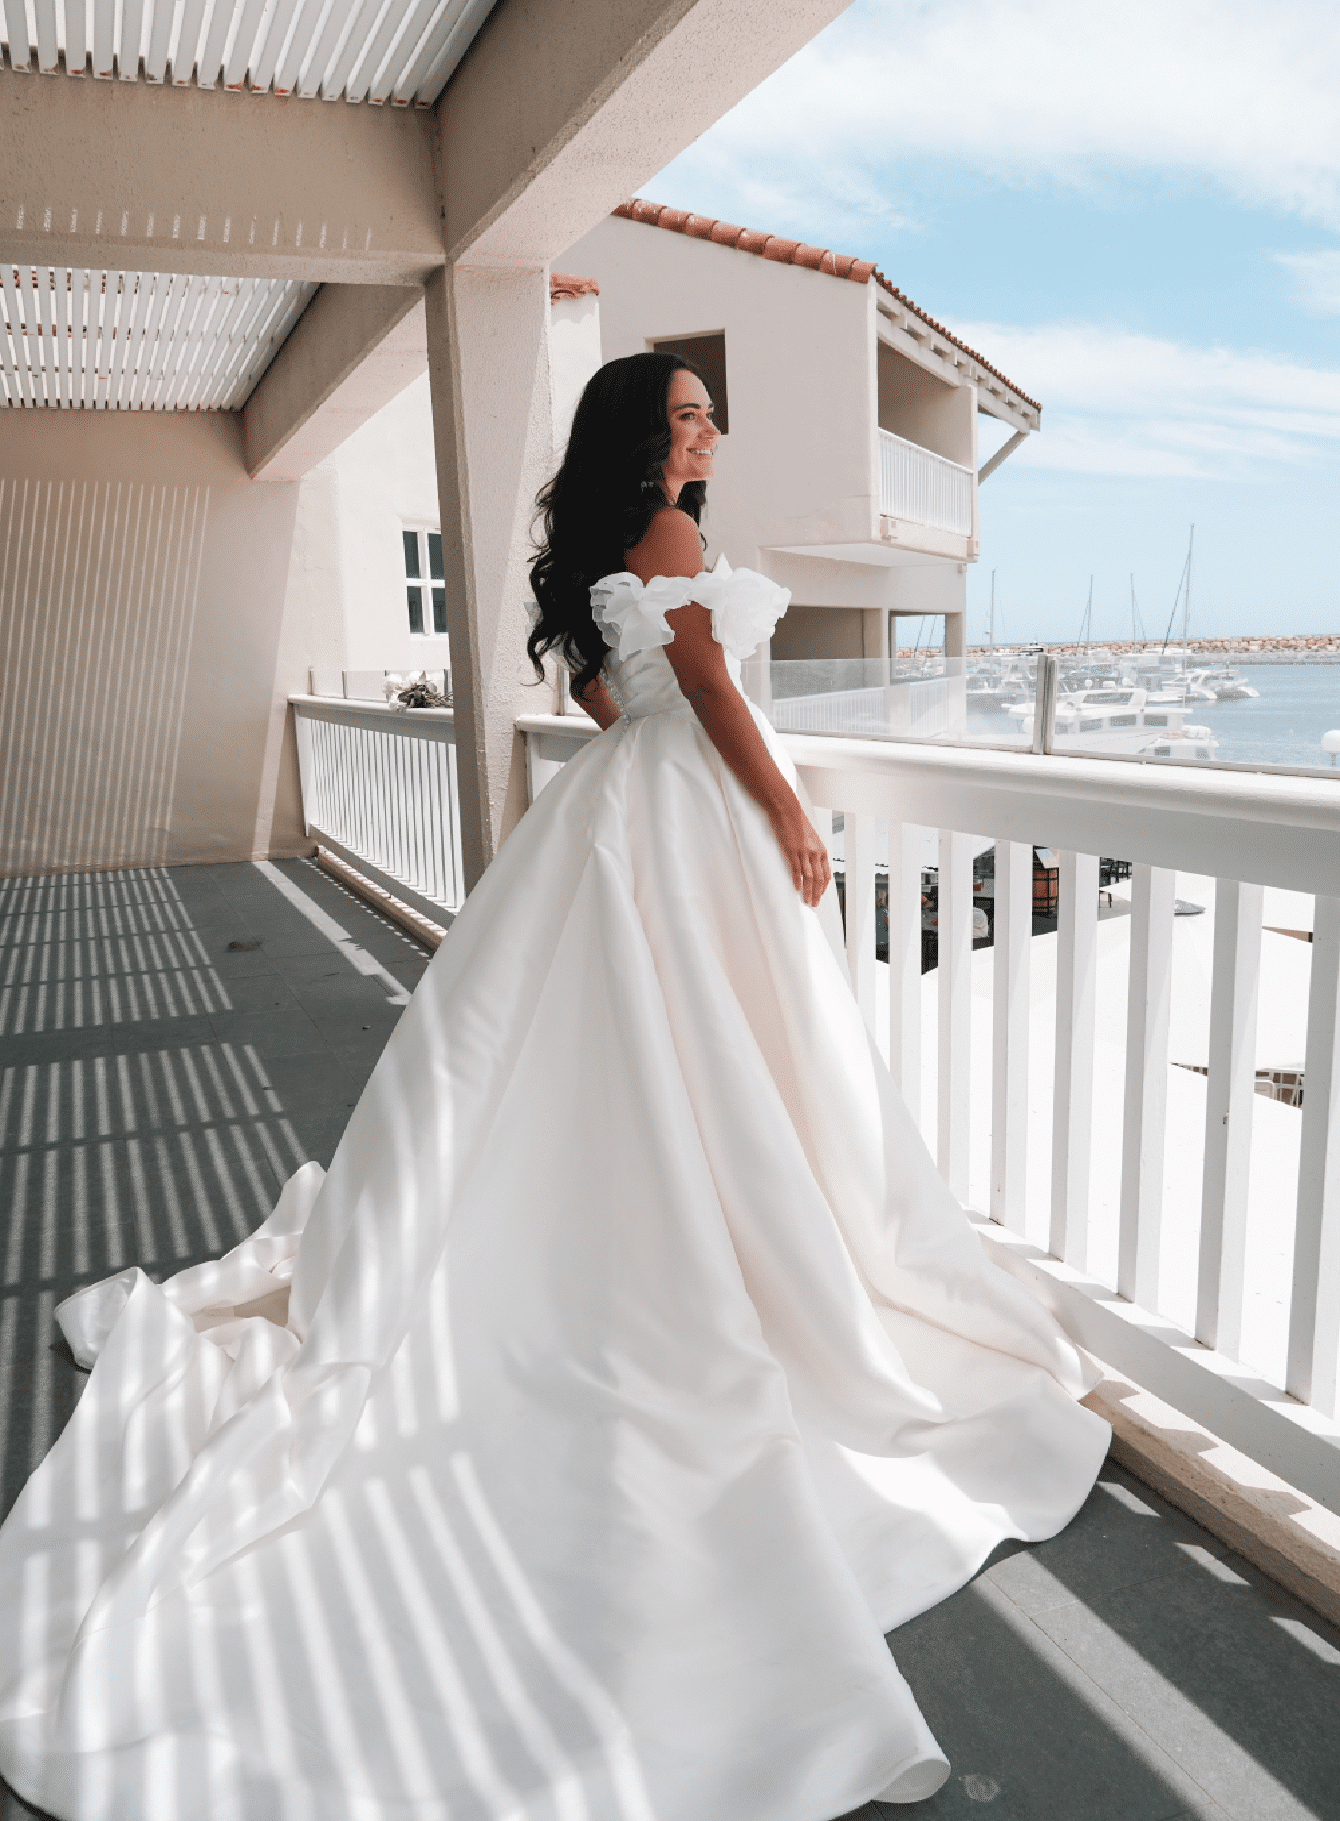 Peter Trends Bridal, Australia, offers Washington brides a wide selection of highly personal, customizable wedding dresses with effortlessly chic and wildly romantic vibes